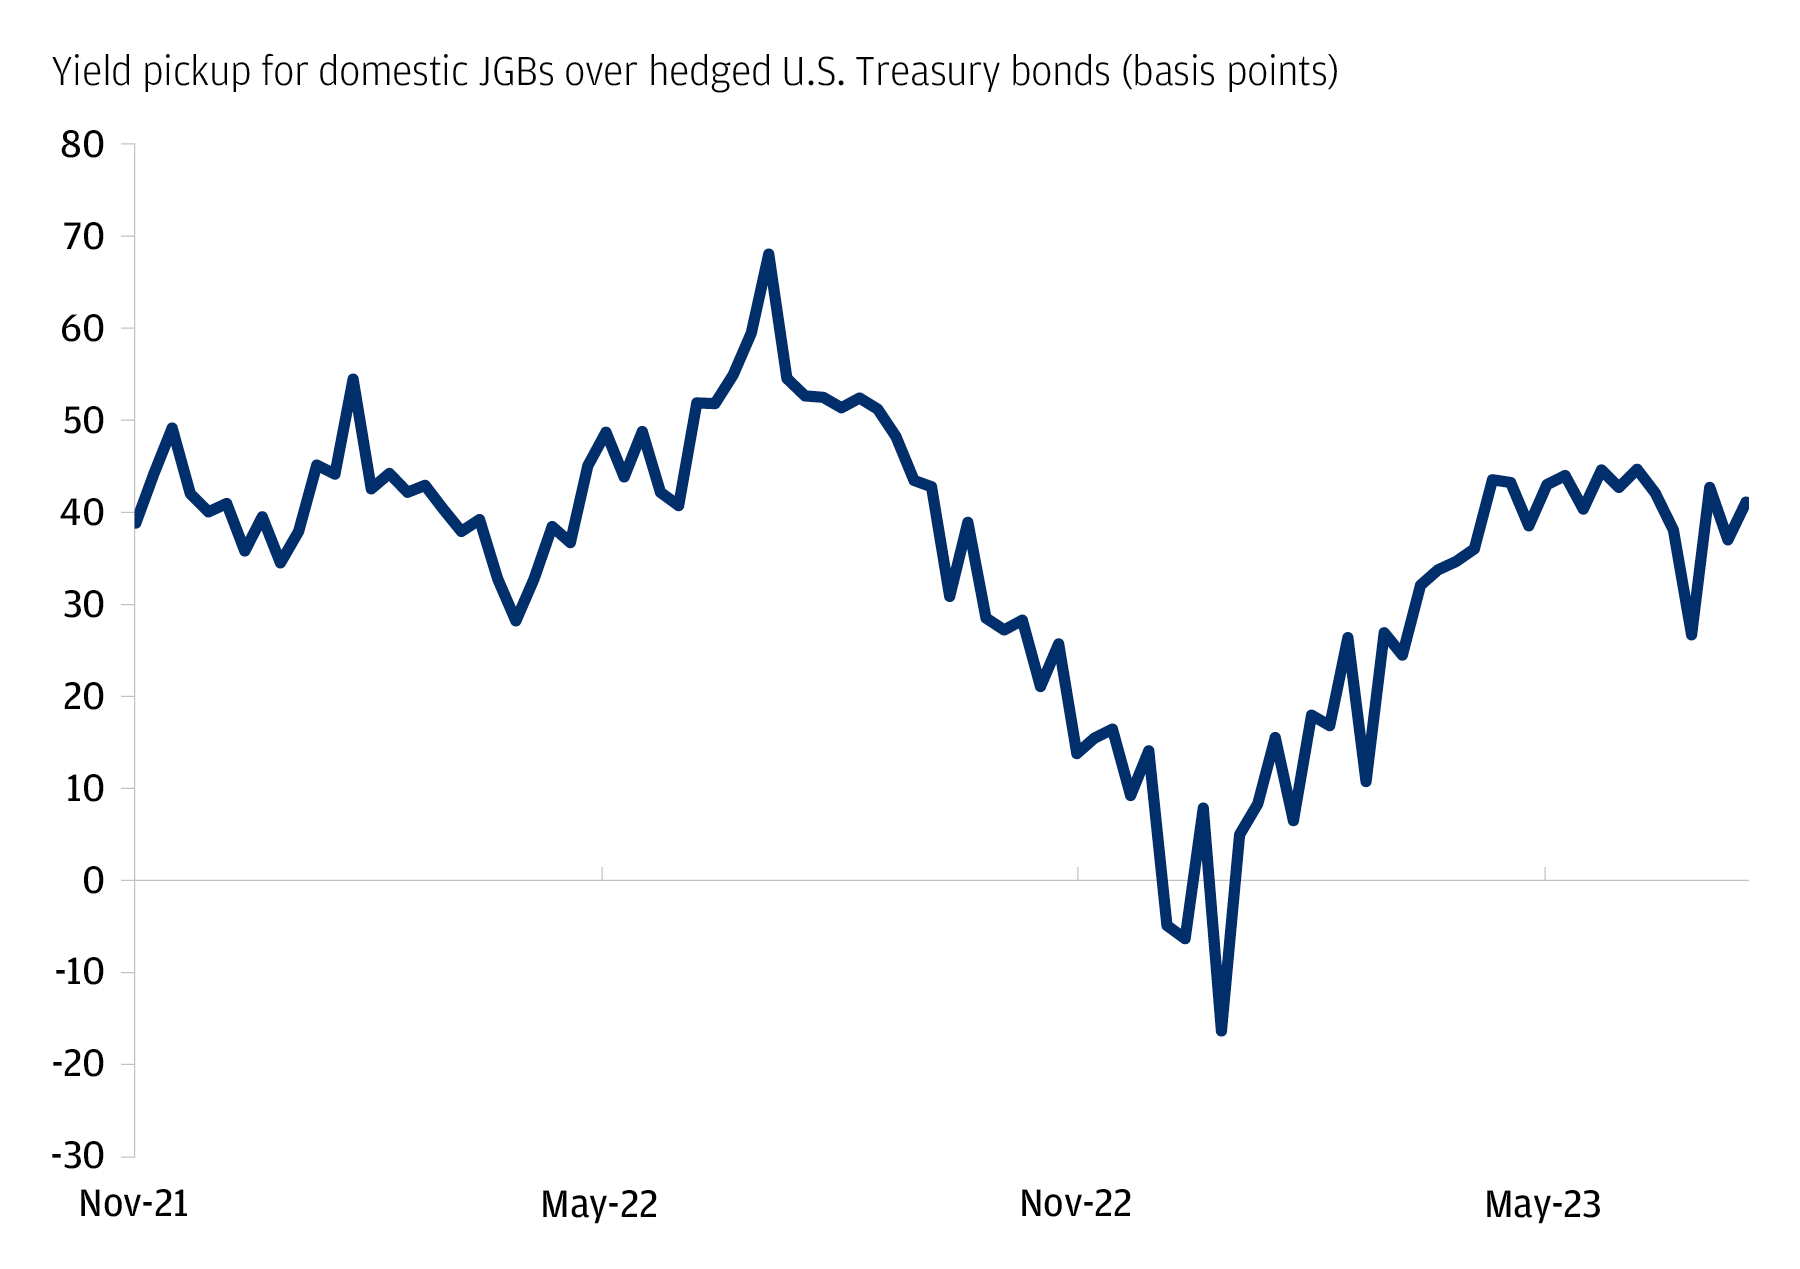 The chart describes the yield pickup for domestic JGBs over hedged U.S. Treasury bonds (bps).